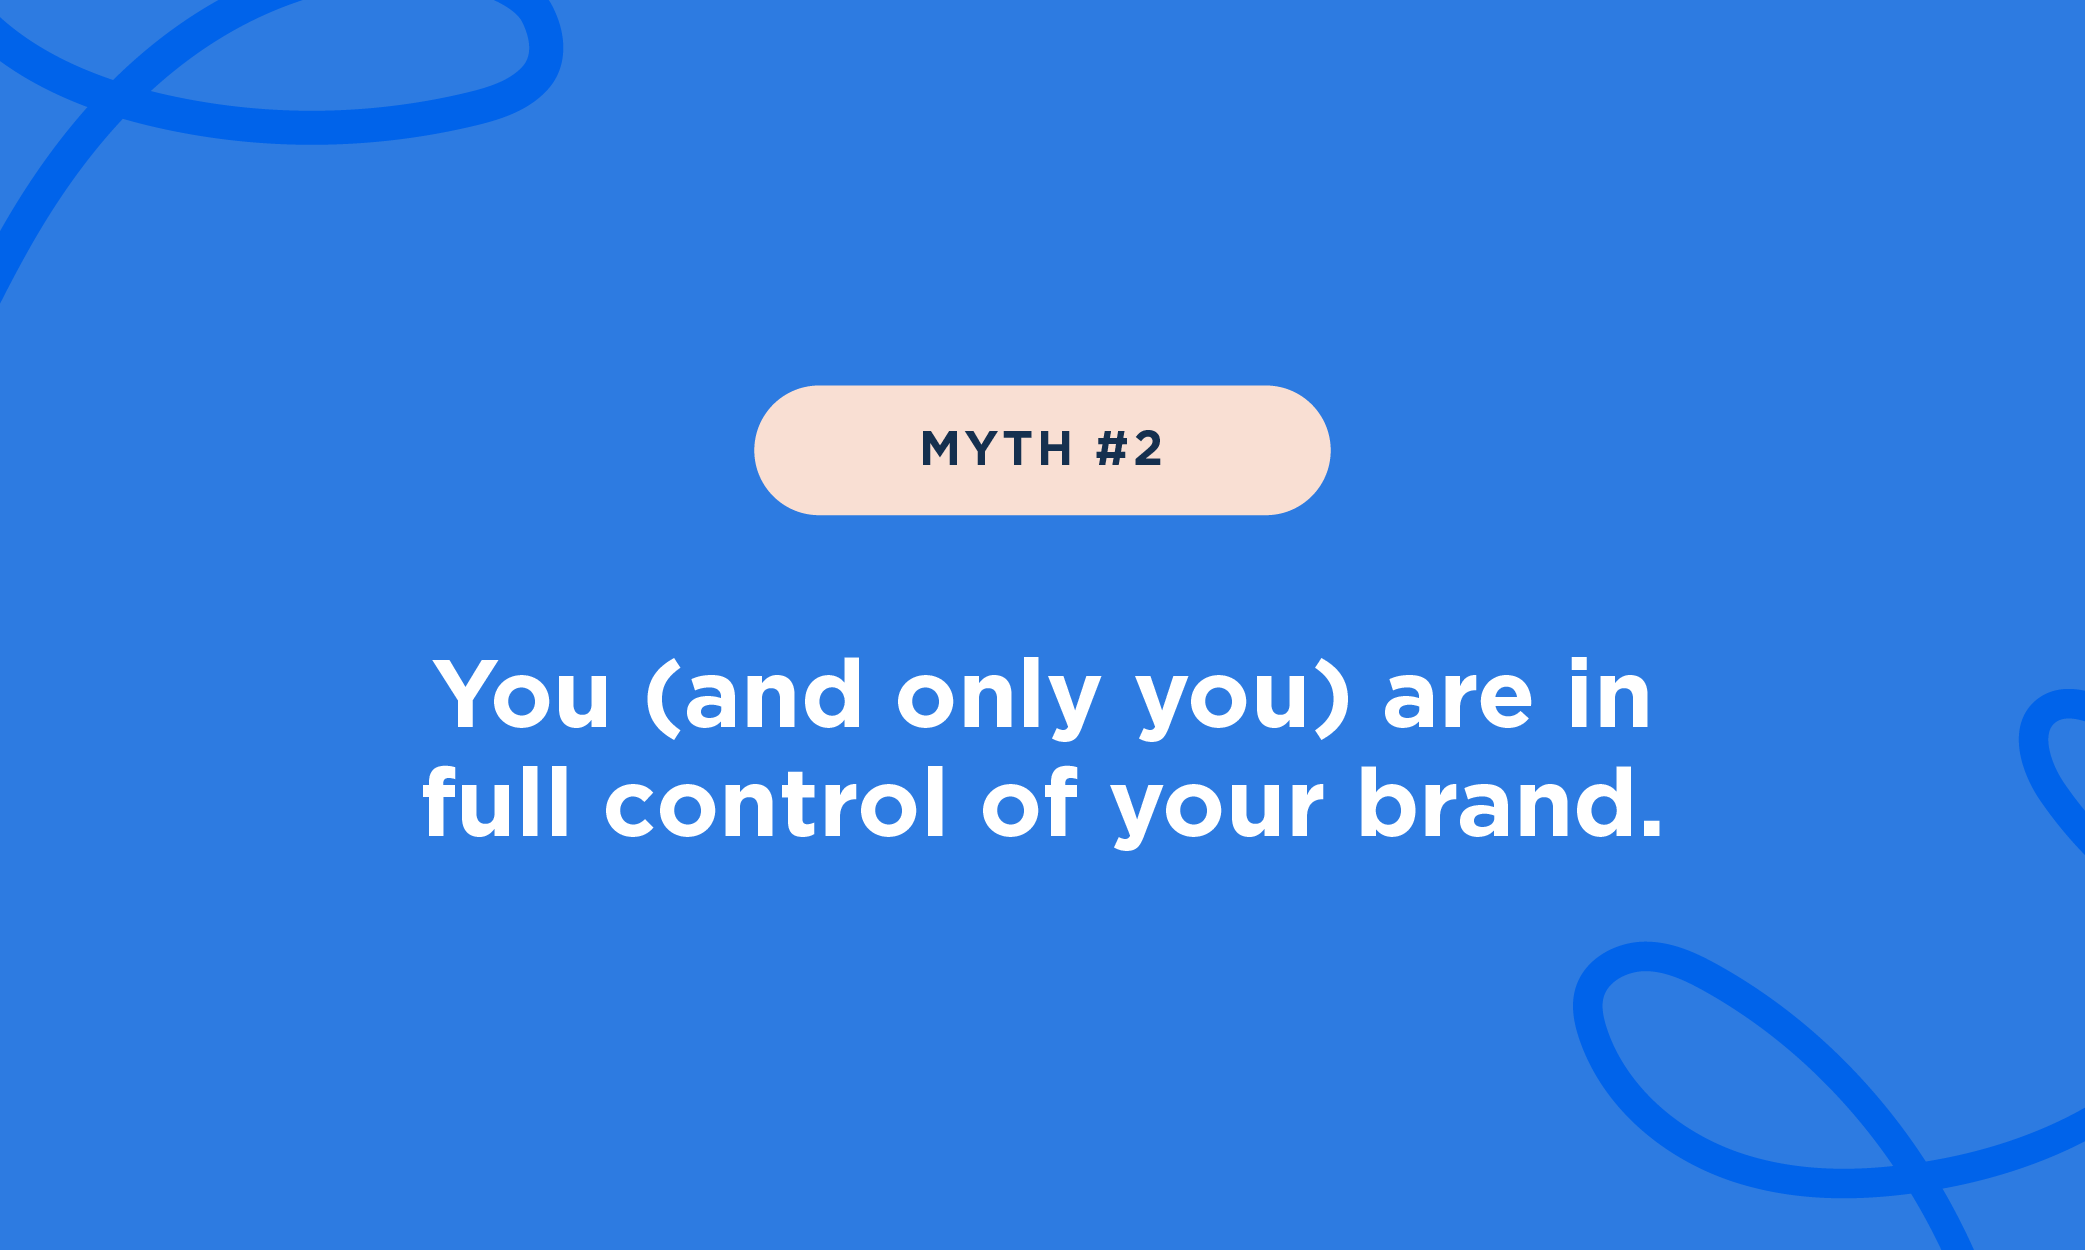 Myth #2 is that you and only you are in full control of your brand.